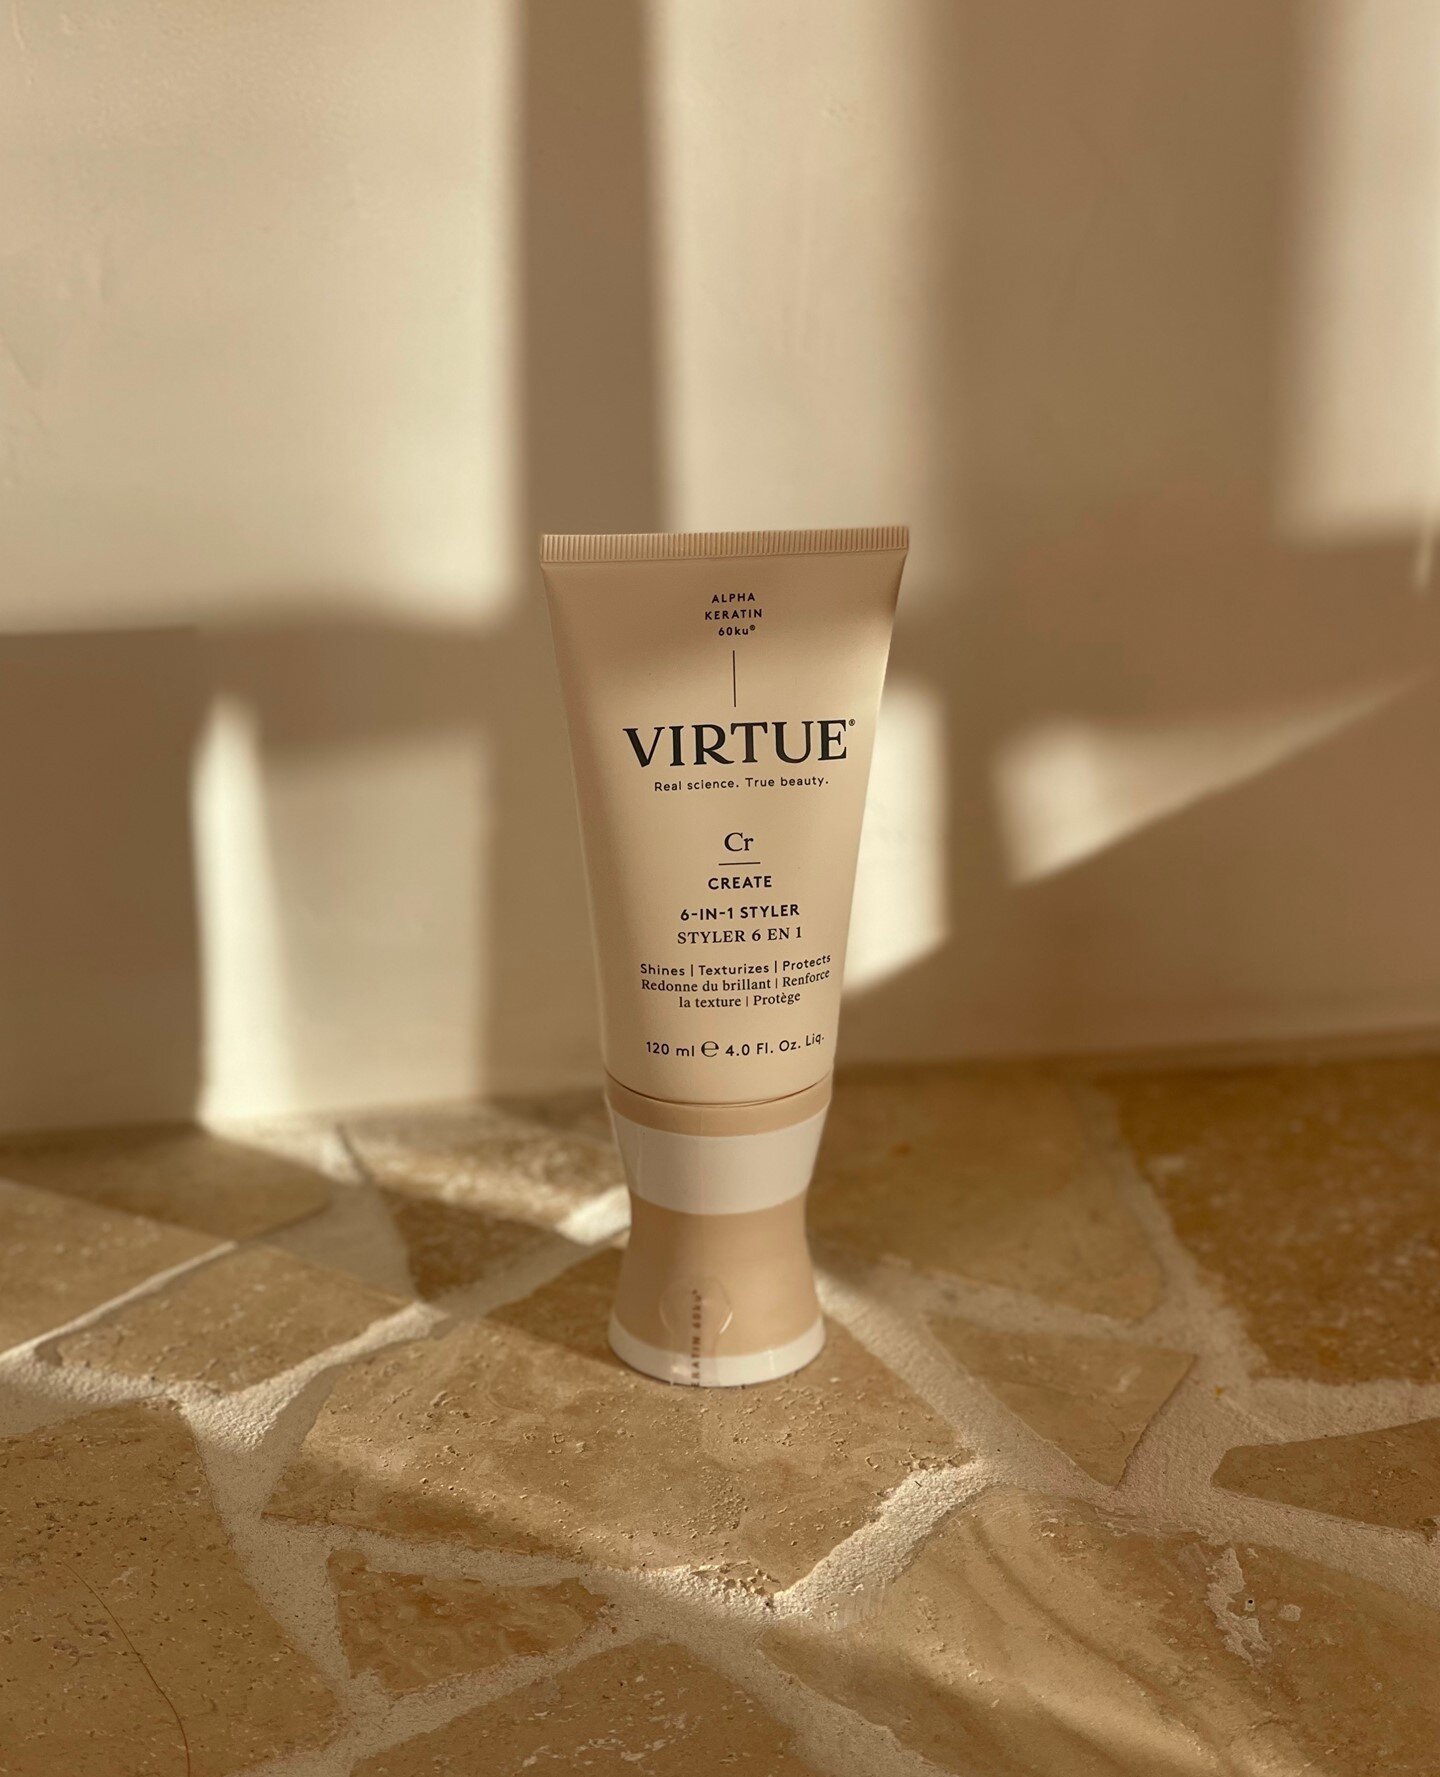 HAVE YOU TRIED OUR VIRTUE PRODUCTS?⁠
⁠
Not only does Virtue look stunning on your shelf, these high quality products fill your hair with nutrients to help your Frais hair stay super fresh and healthy in-between appointments.⁠
⁠
Stop by FRAIS to stock